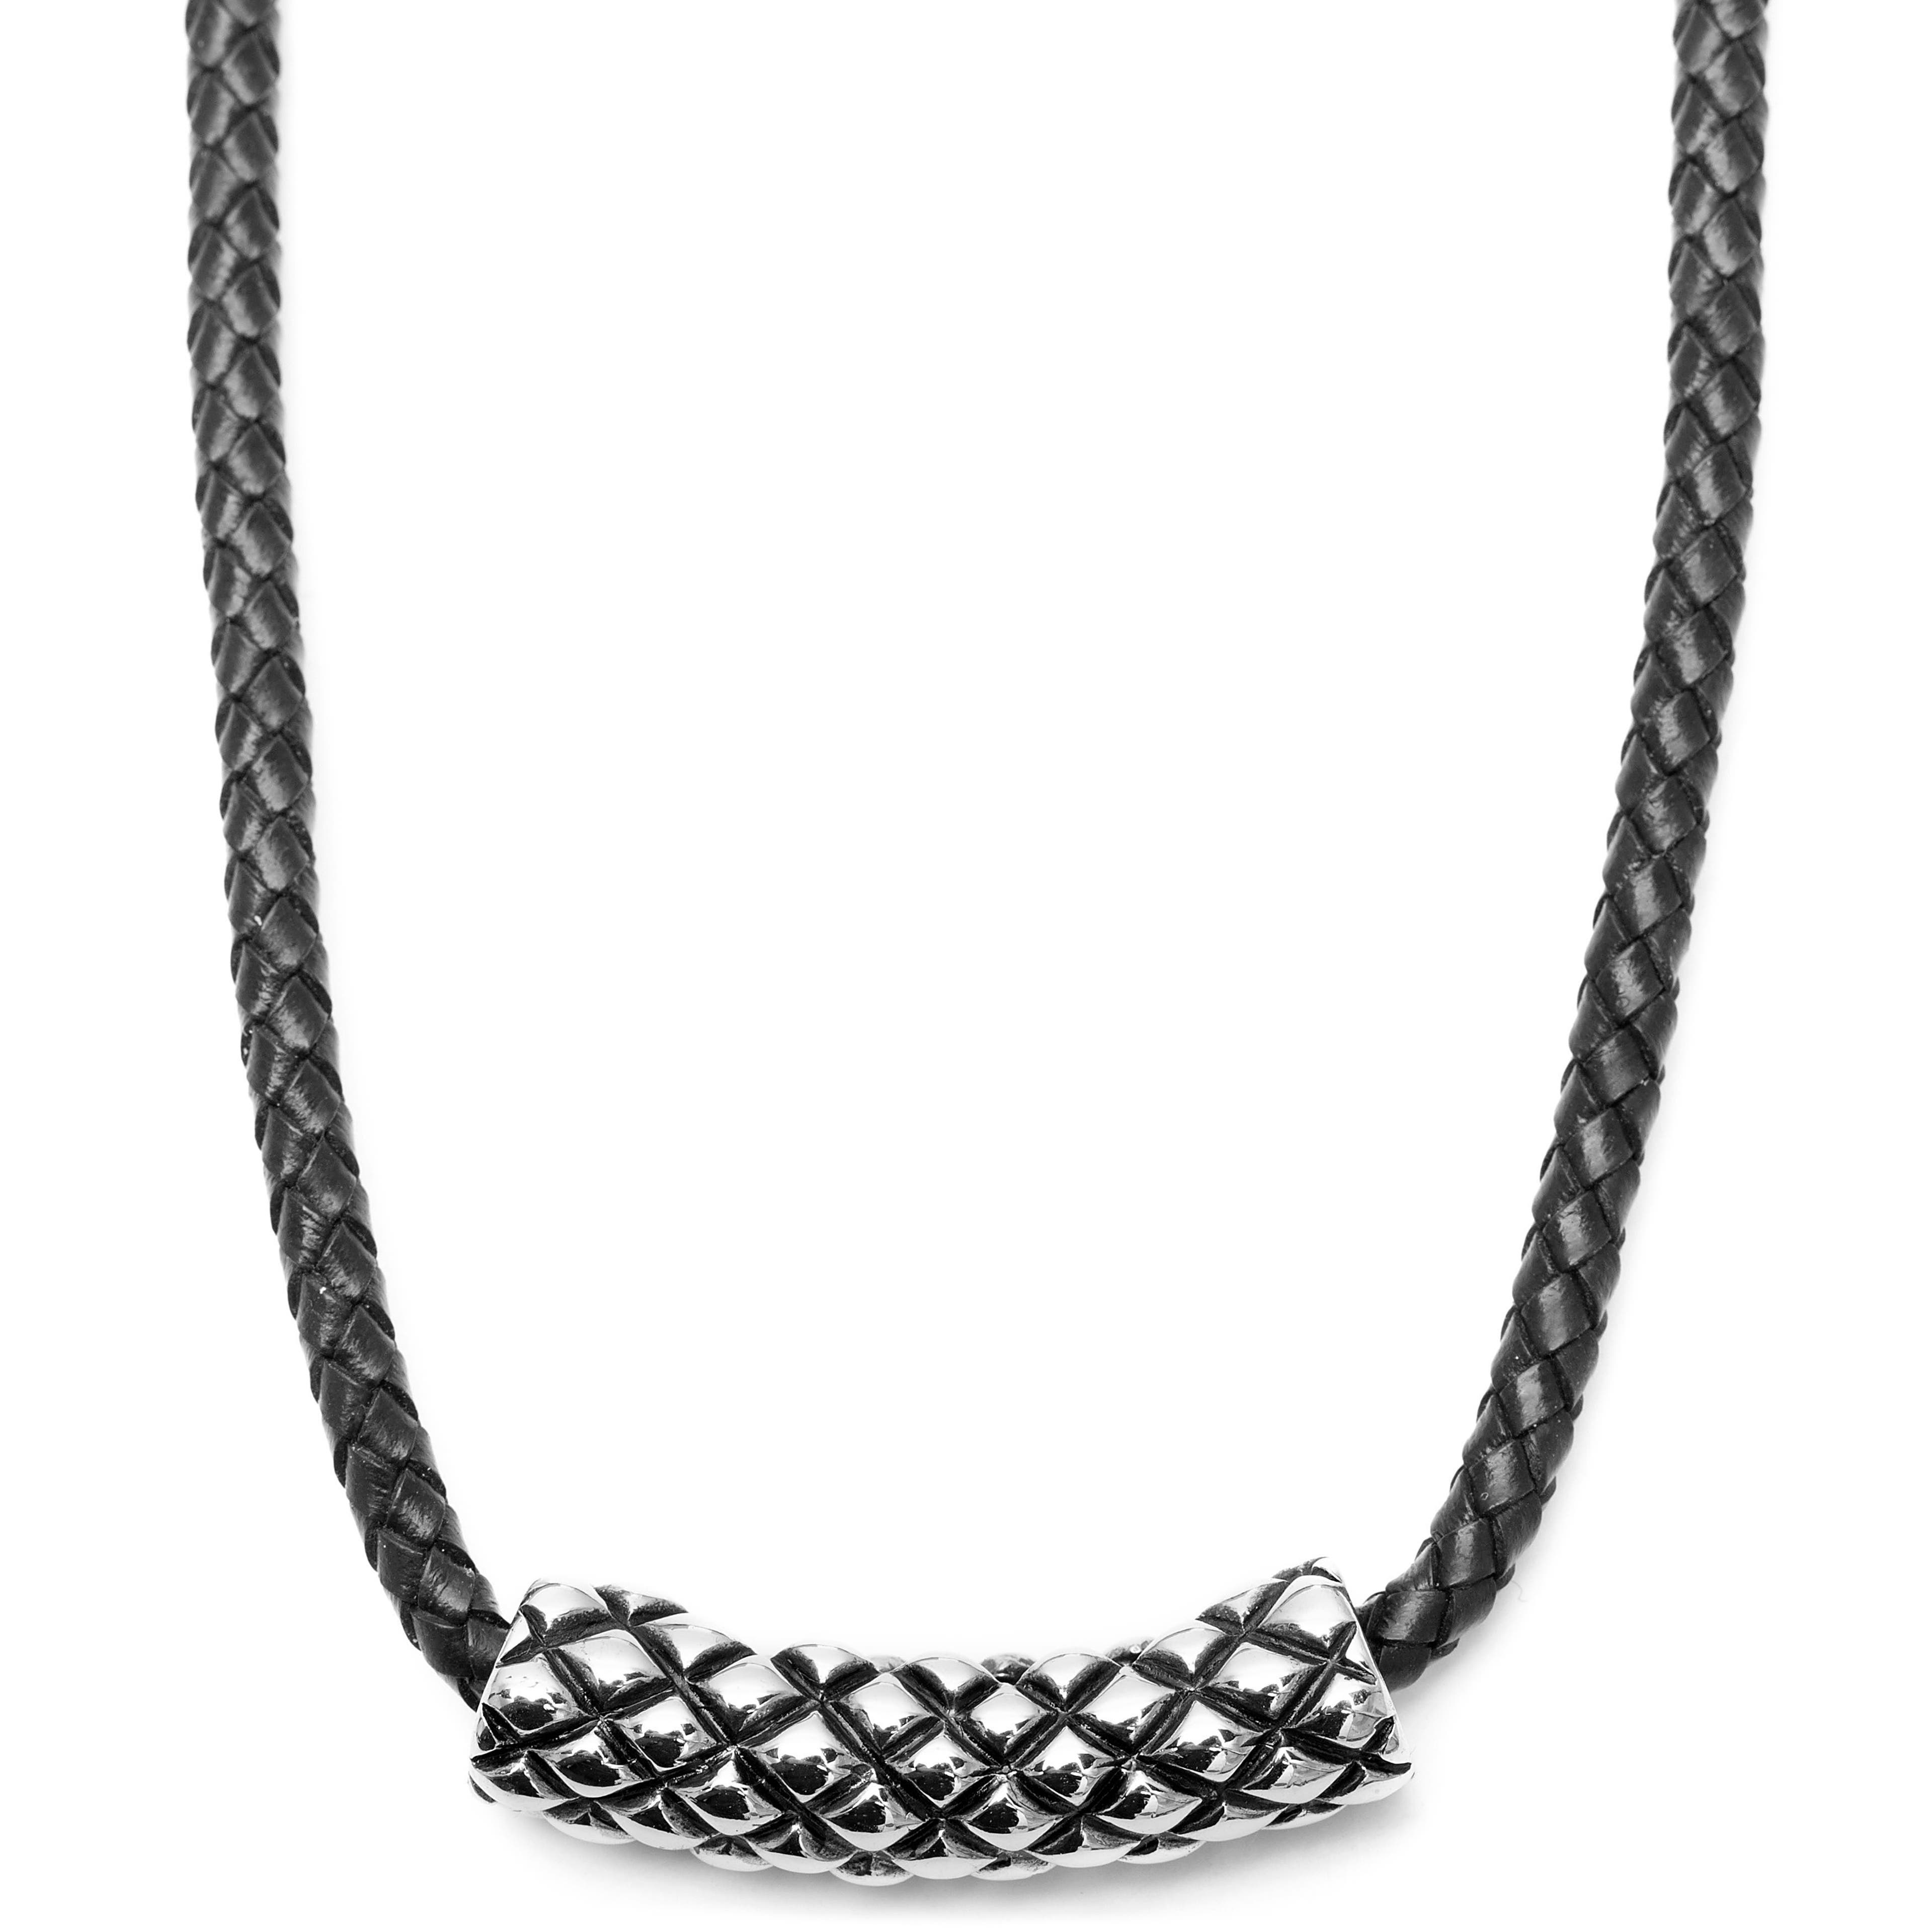 Black Leather With Silver-Tone Stainless Steel Criss Cross Necklace